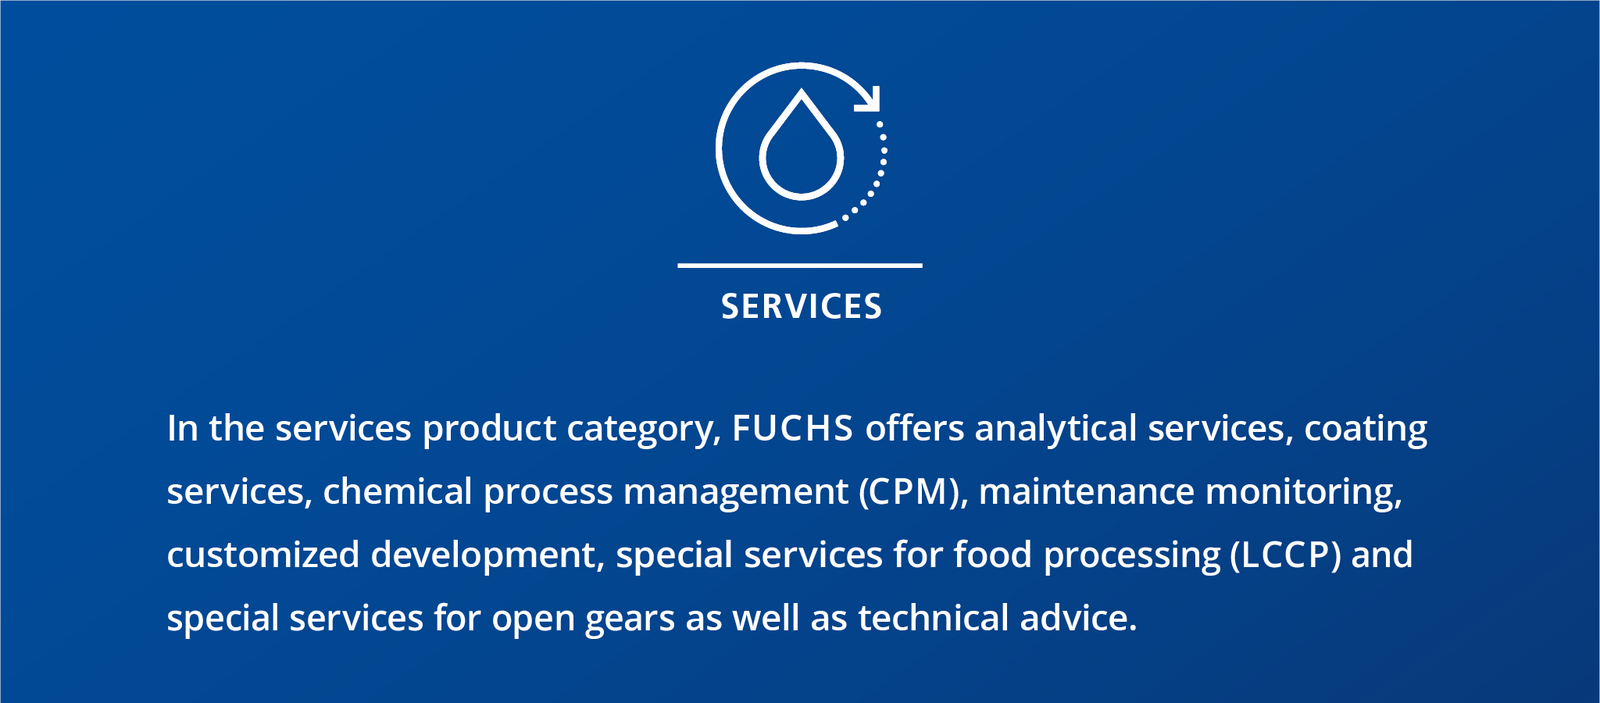 Blue information box explaining the services product category of FUCHS.